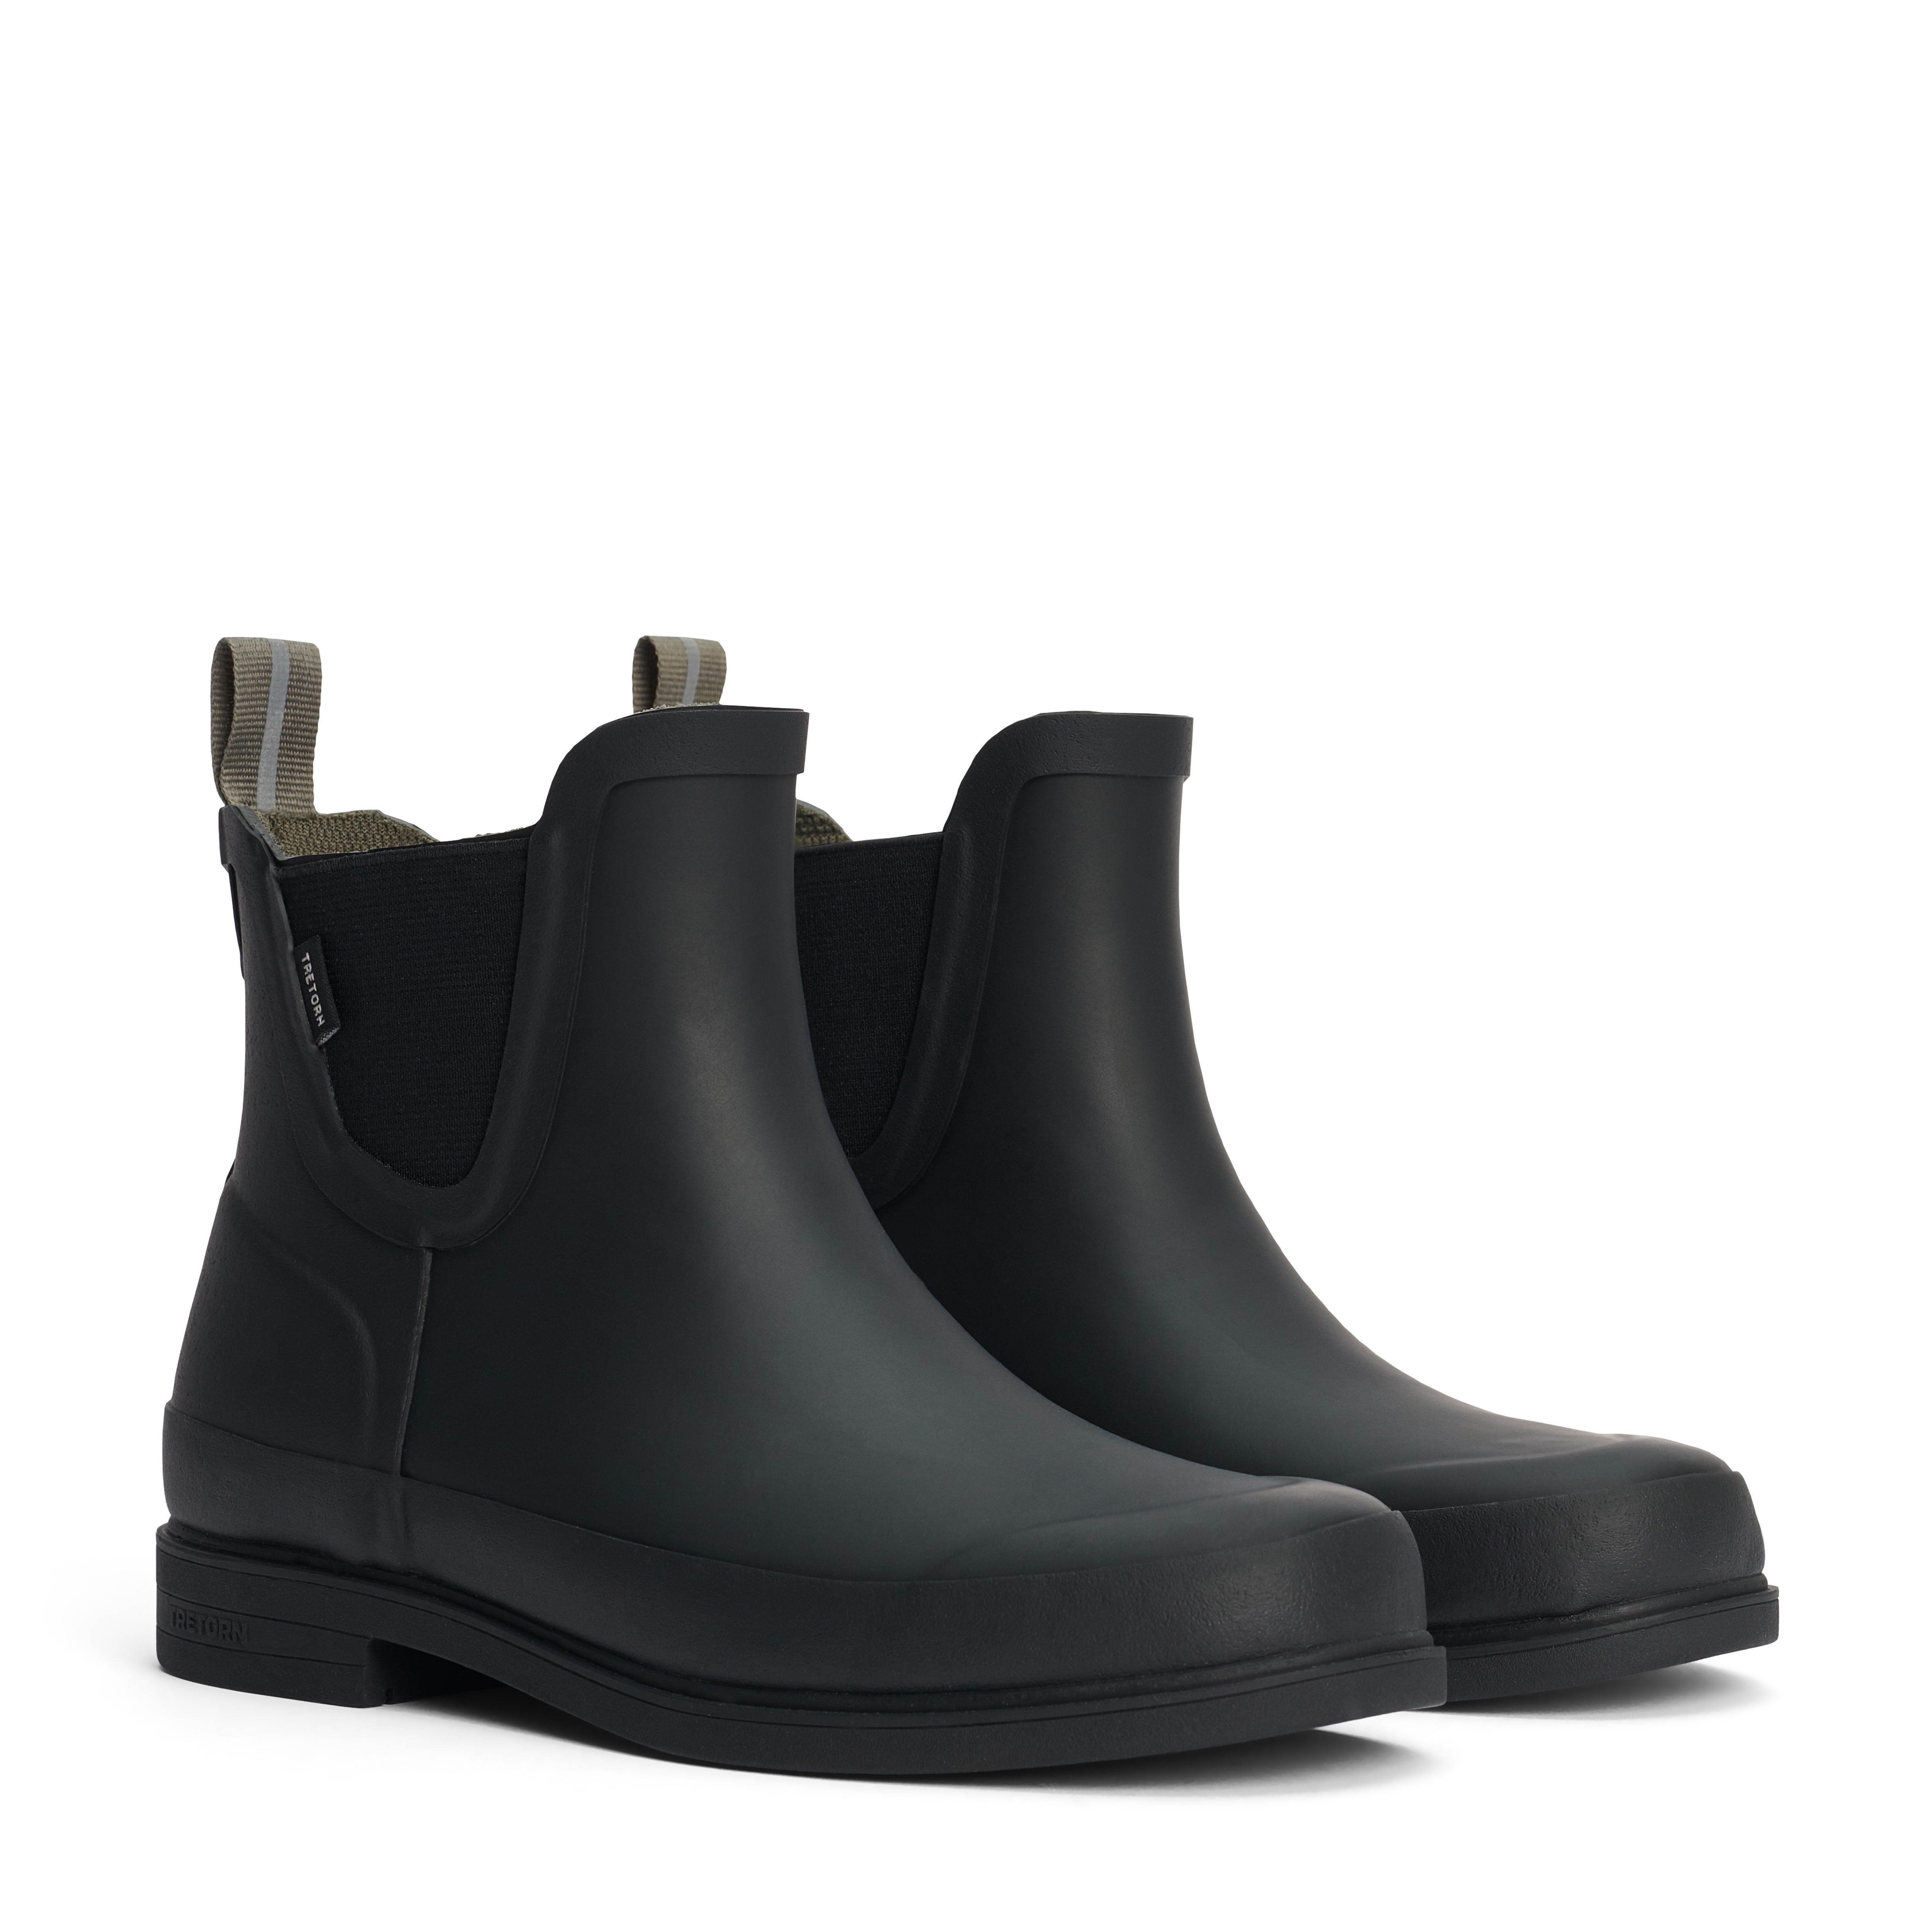 Eva Rubber boot by Tretorn for women in the colour black